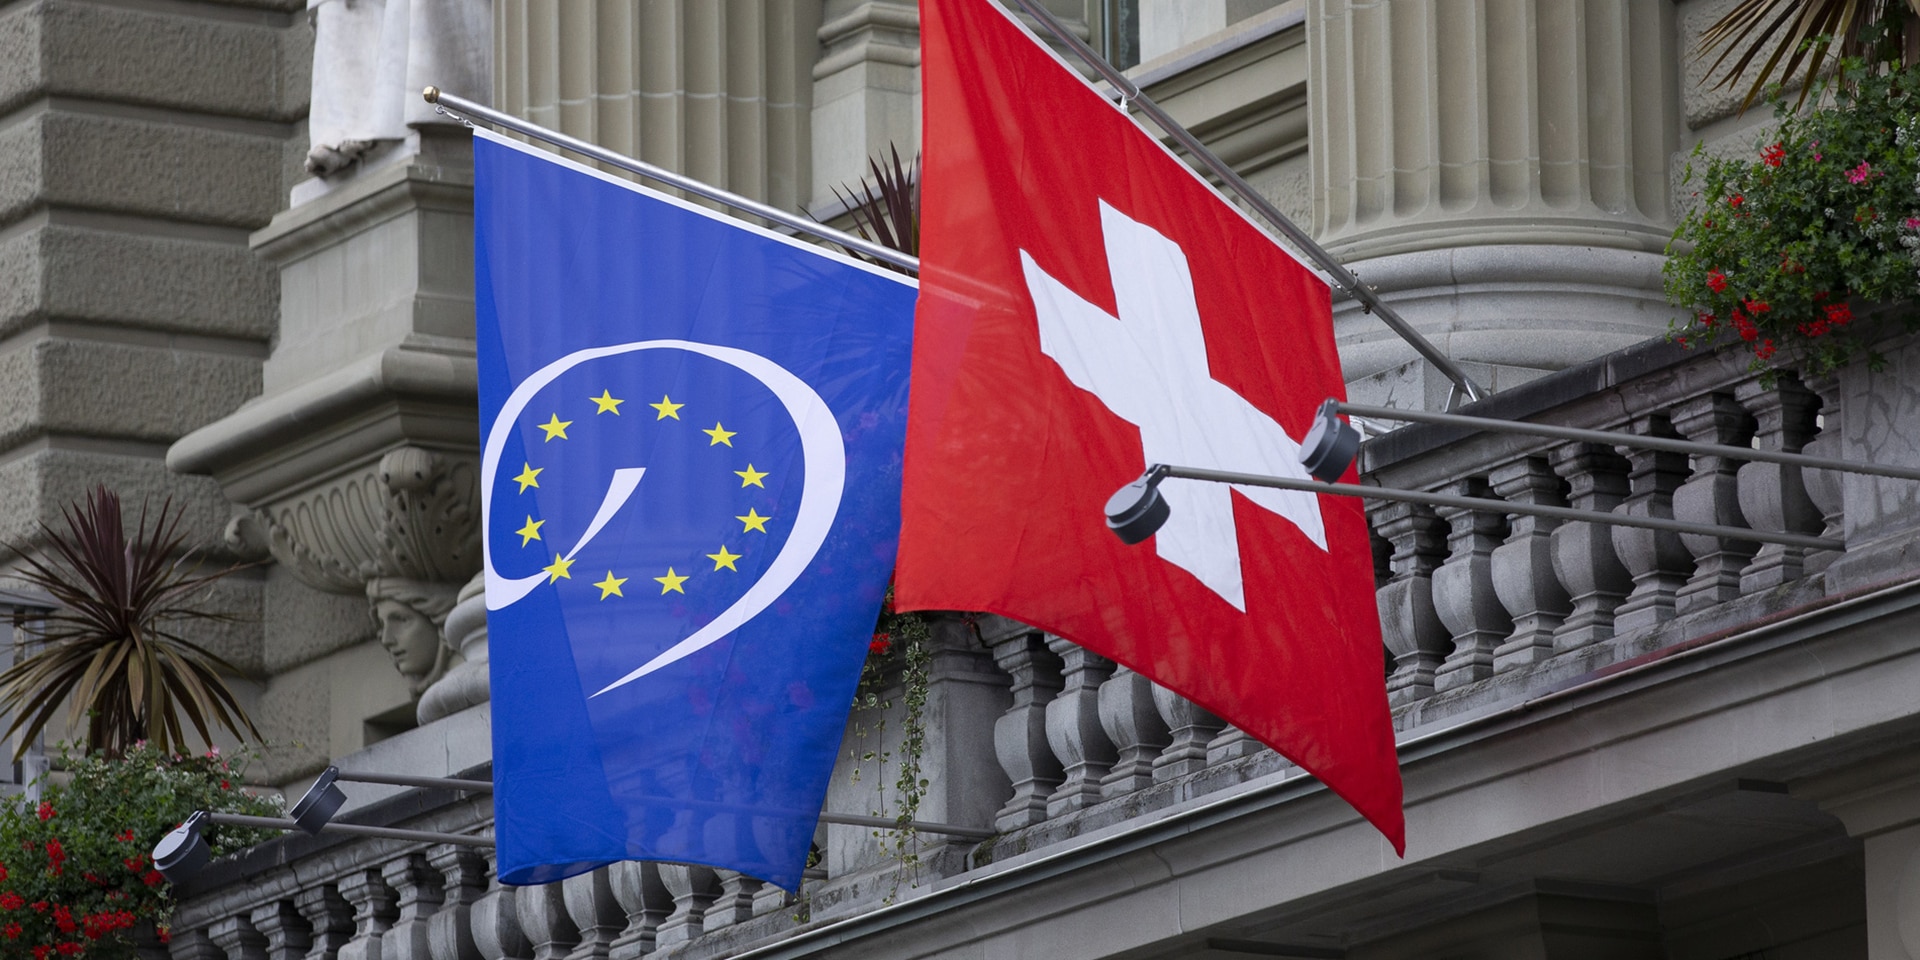 The national flag of Switzerland and the flag of the Council of Europe hanging on the Federal building.